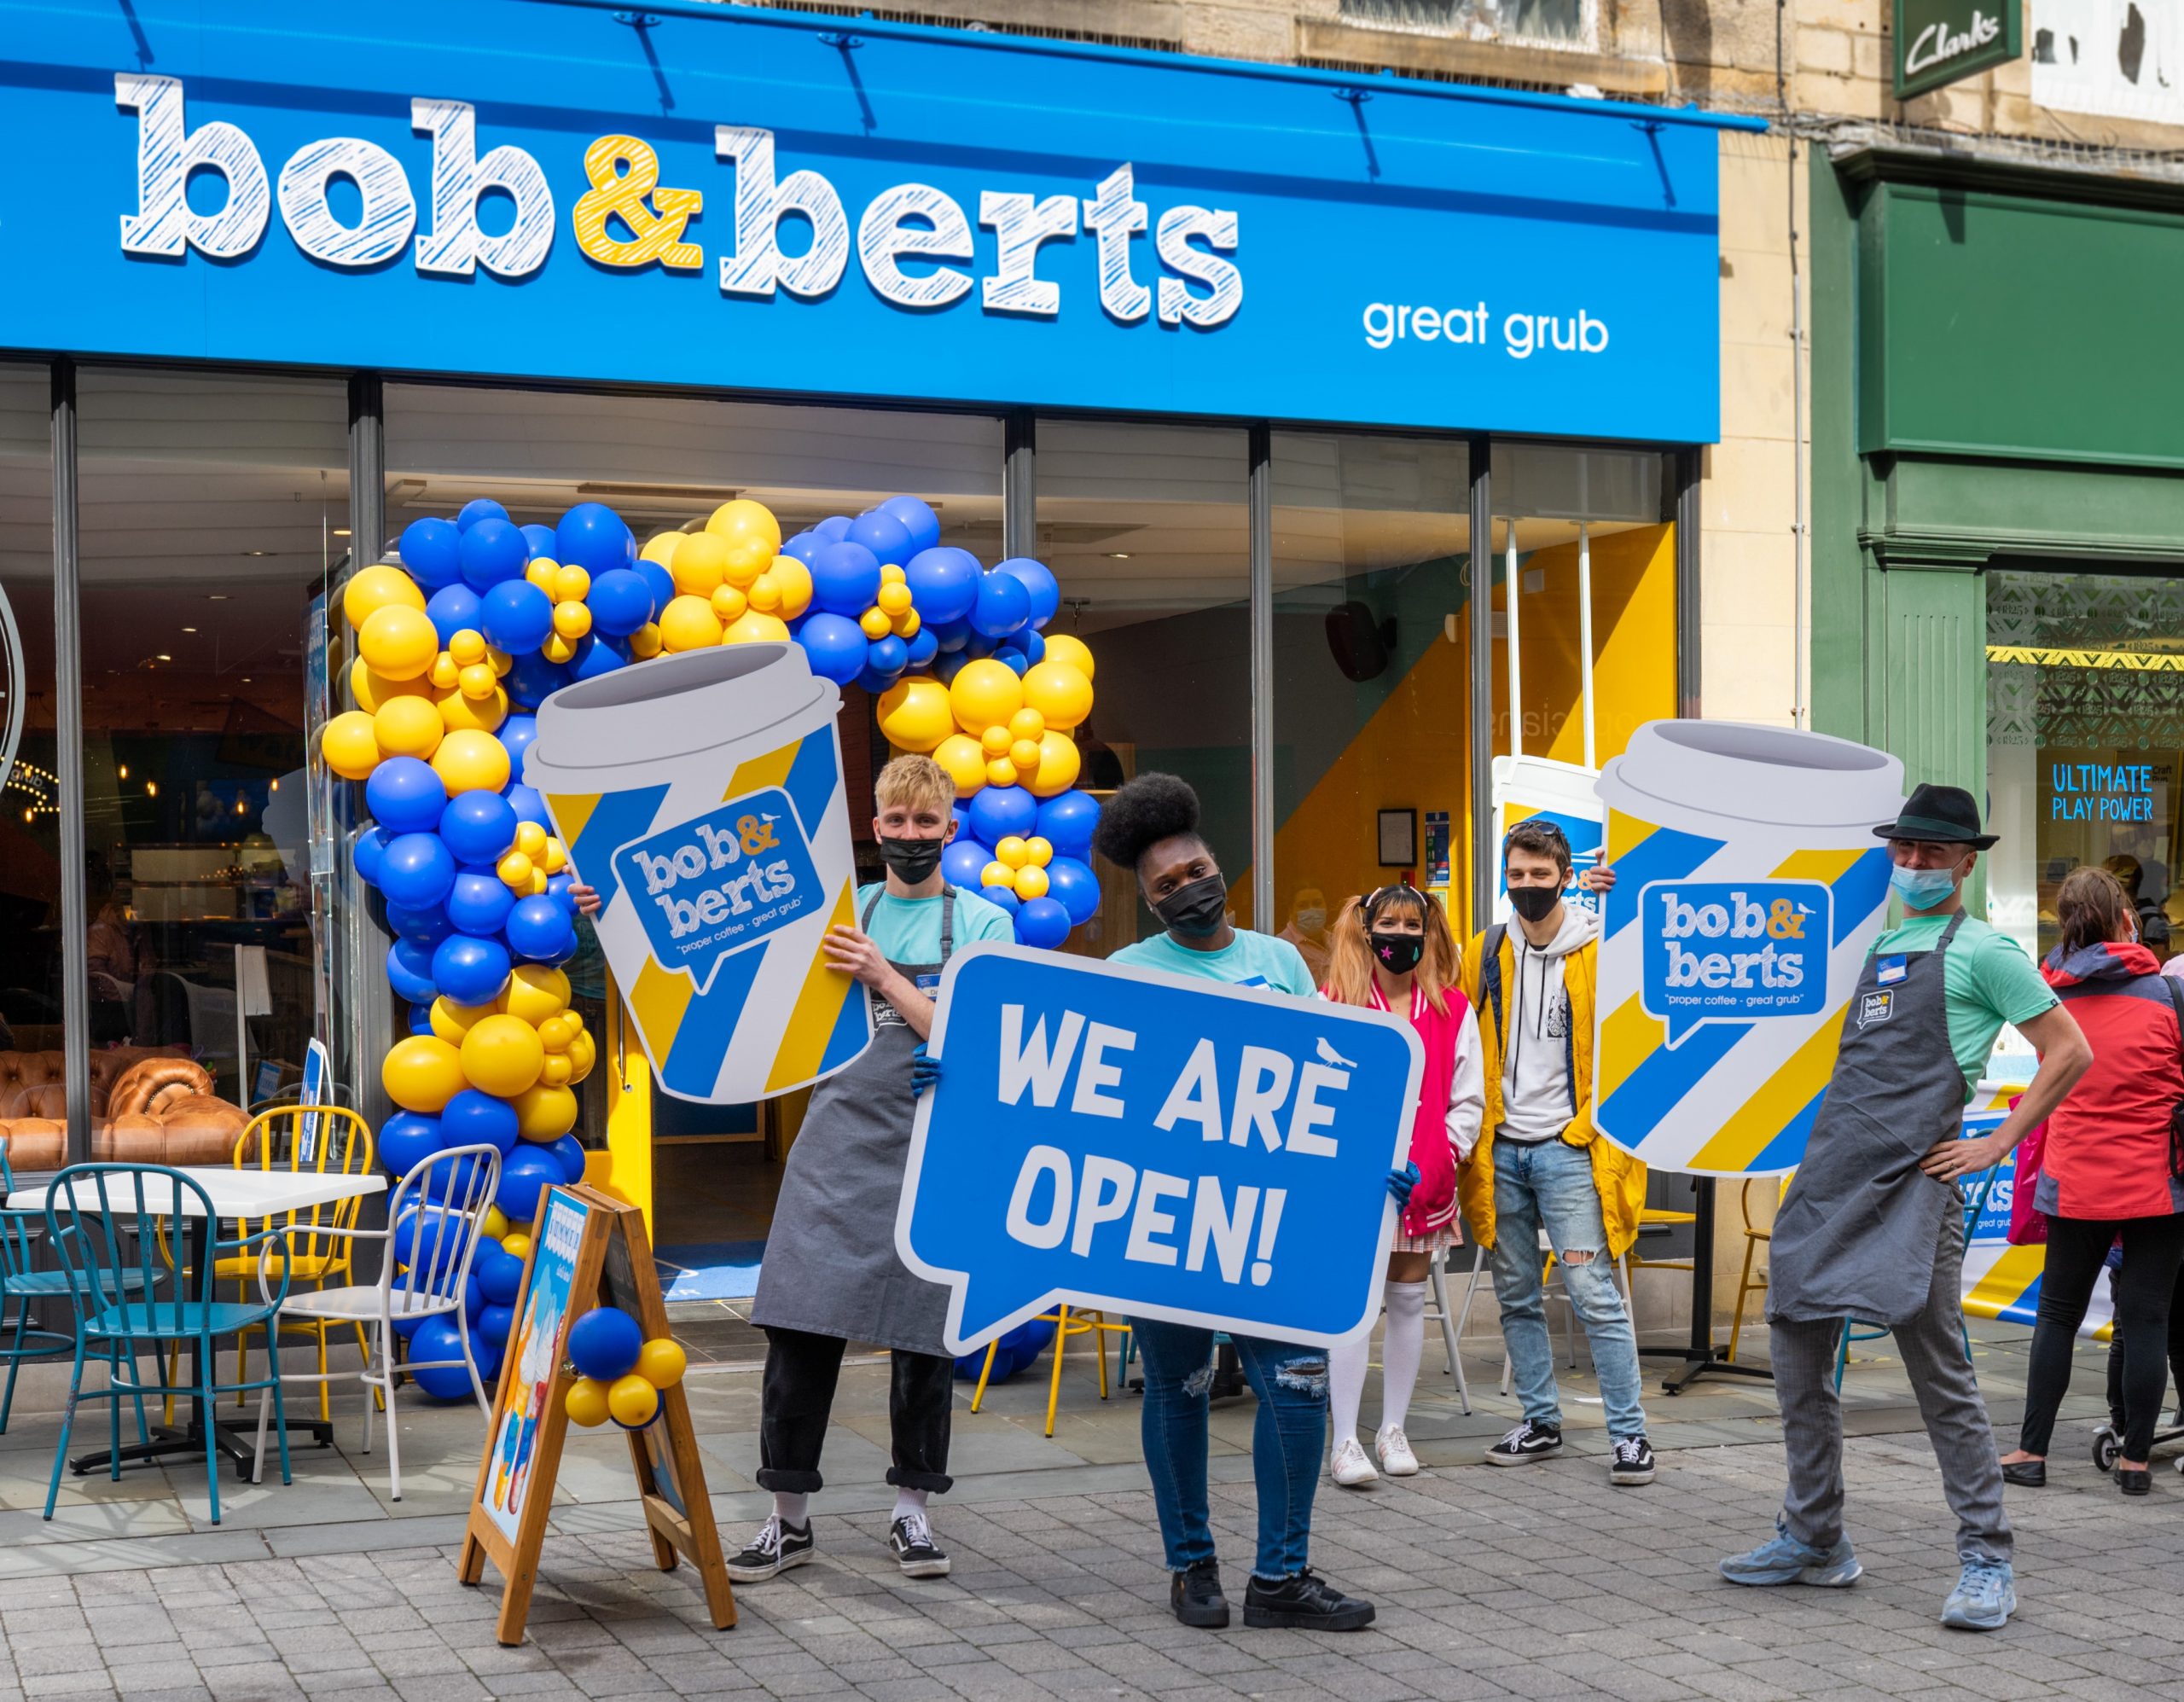 Bob & Berts branch out of Northern Ireland – expansion plans across UK